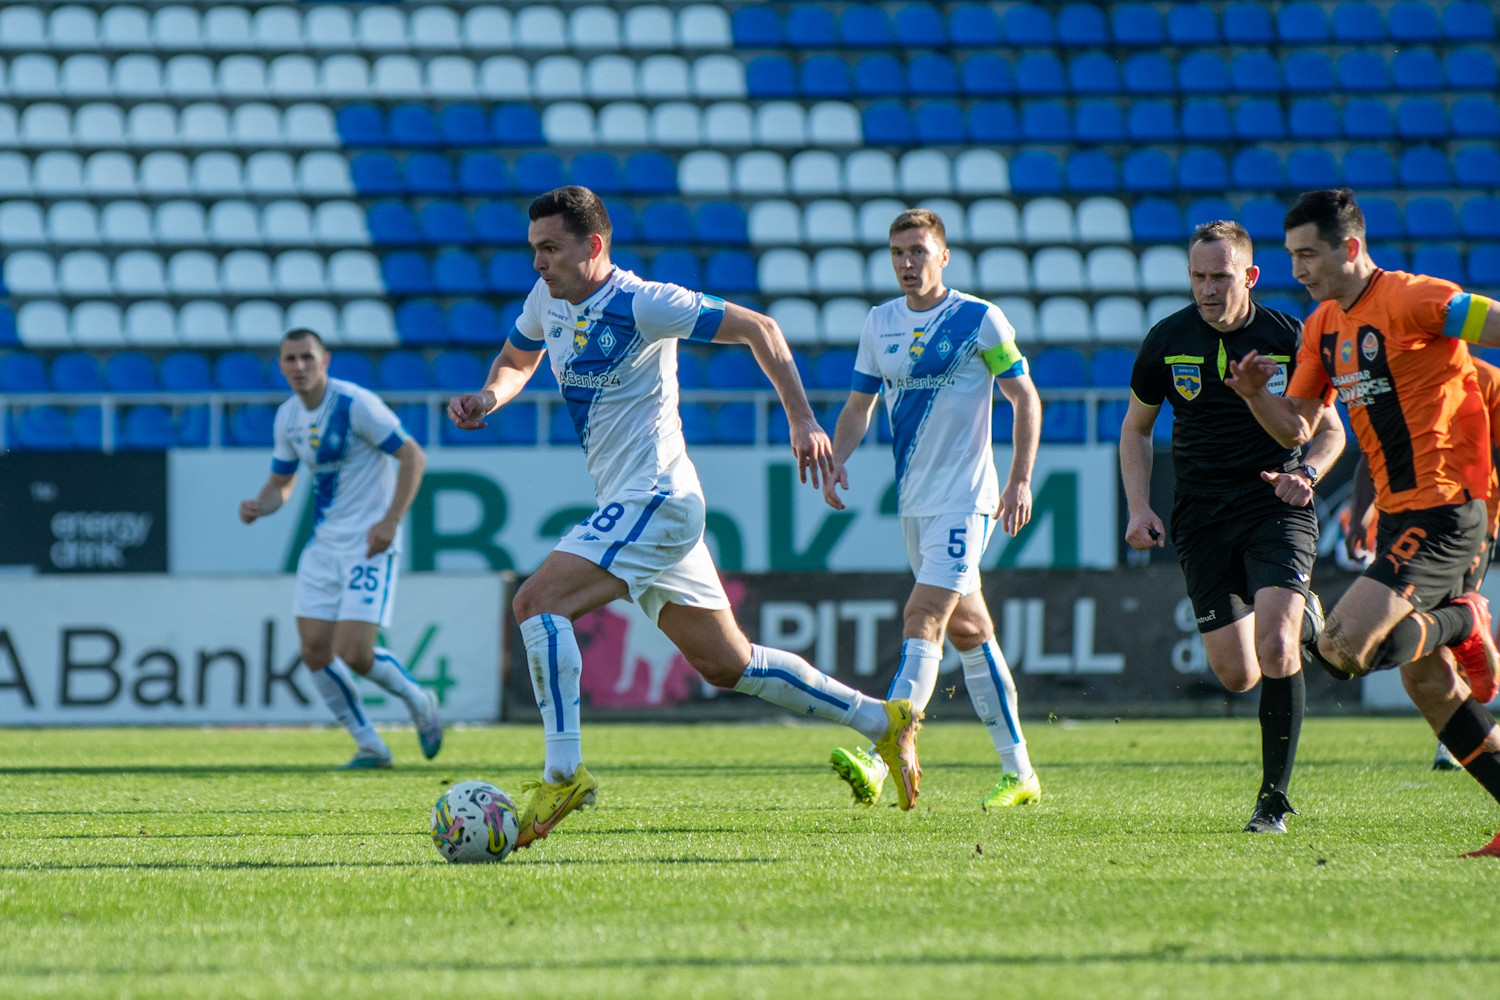 Olexandr Andriyevskyi: “After conceding we had to attack and risk”